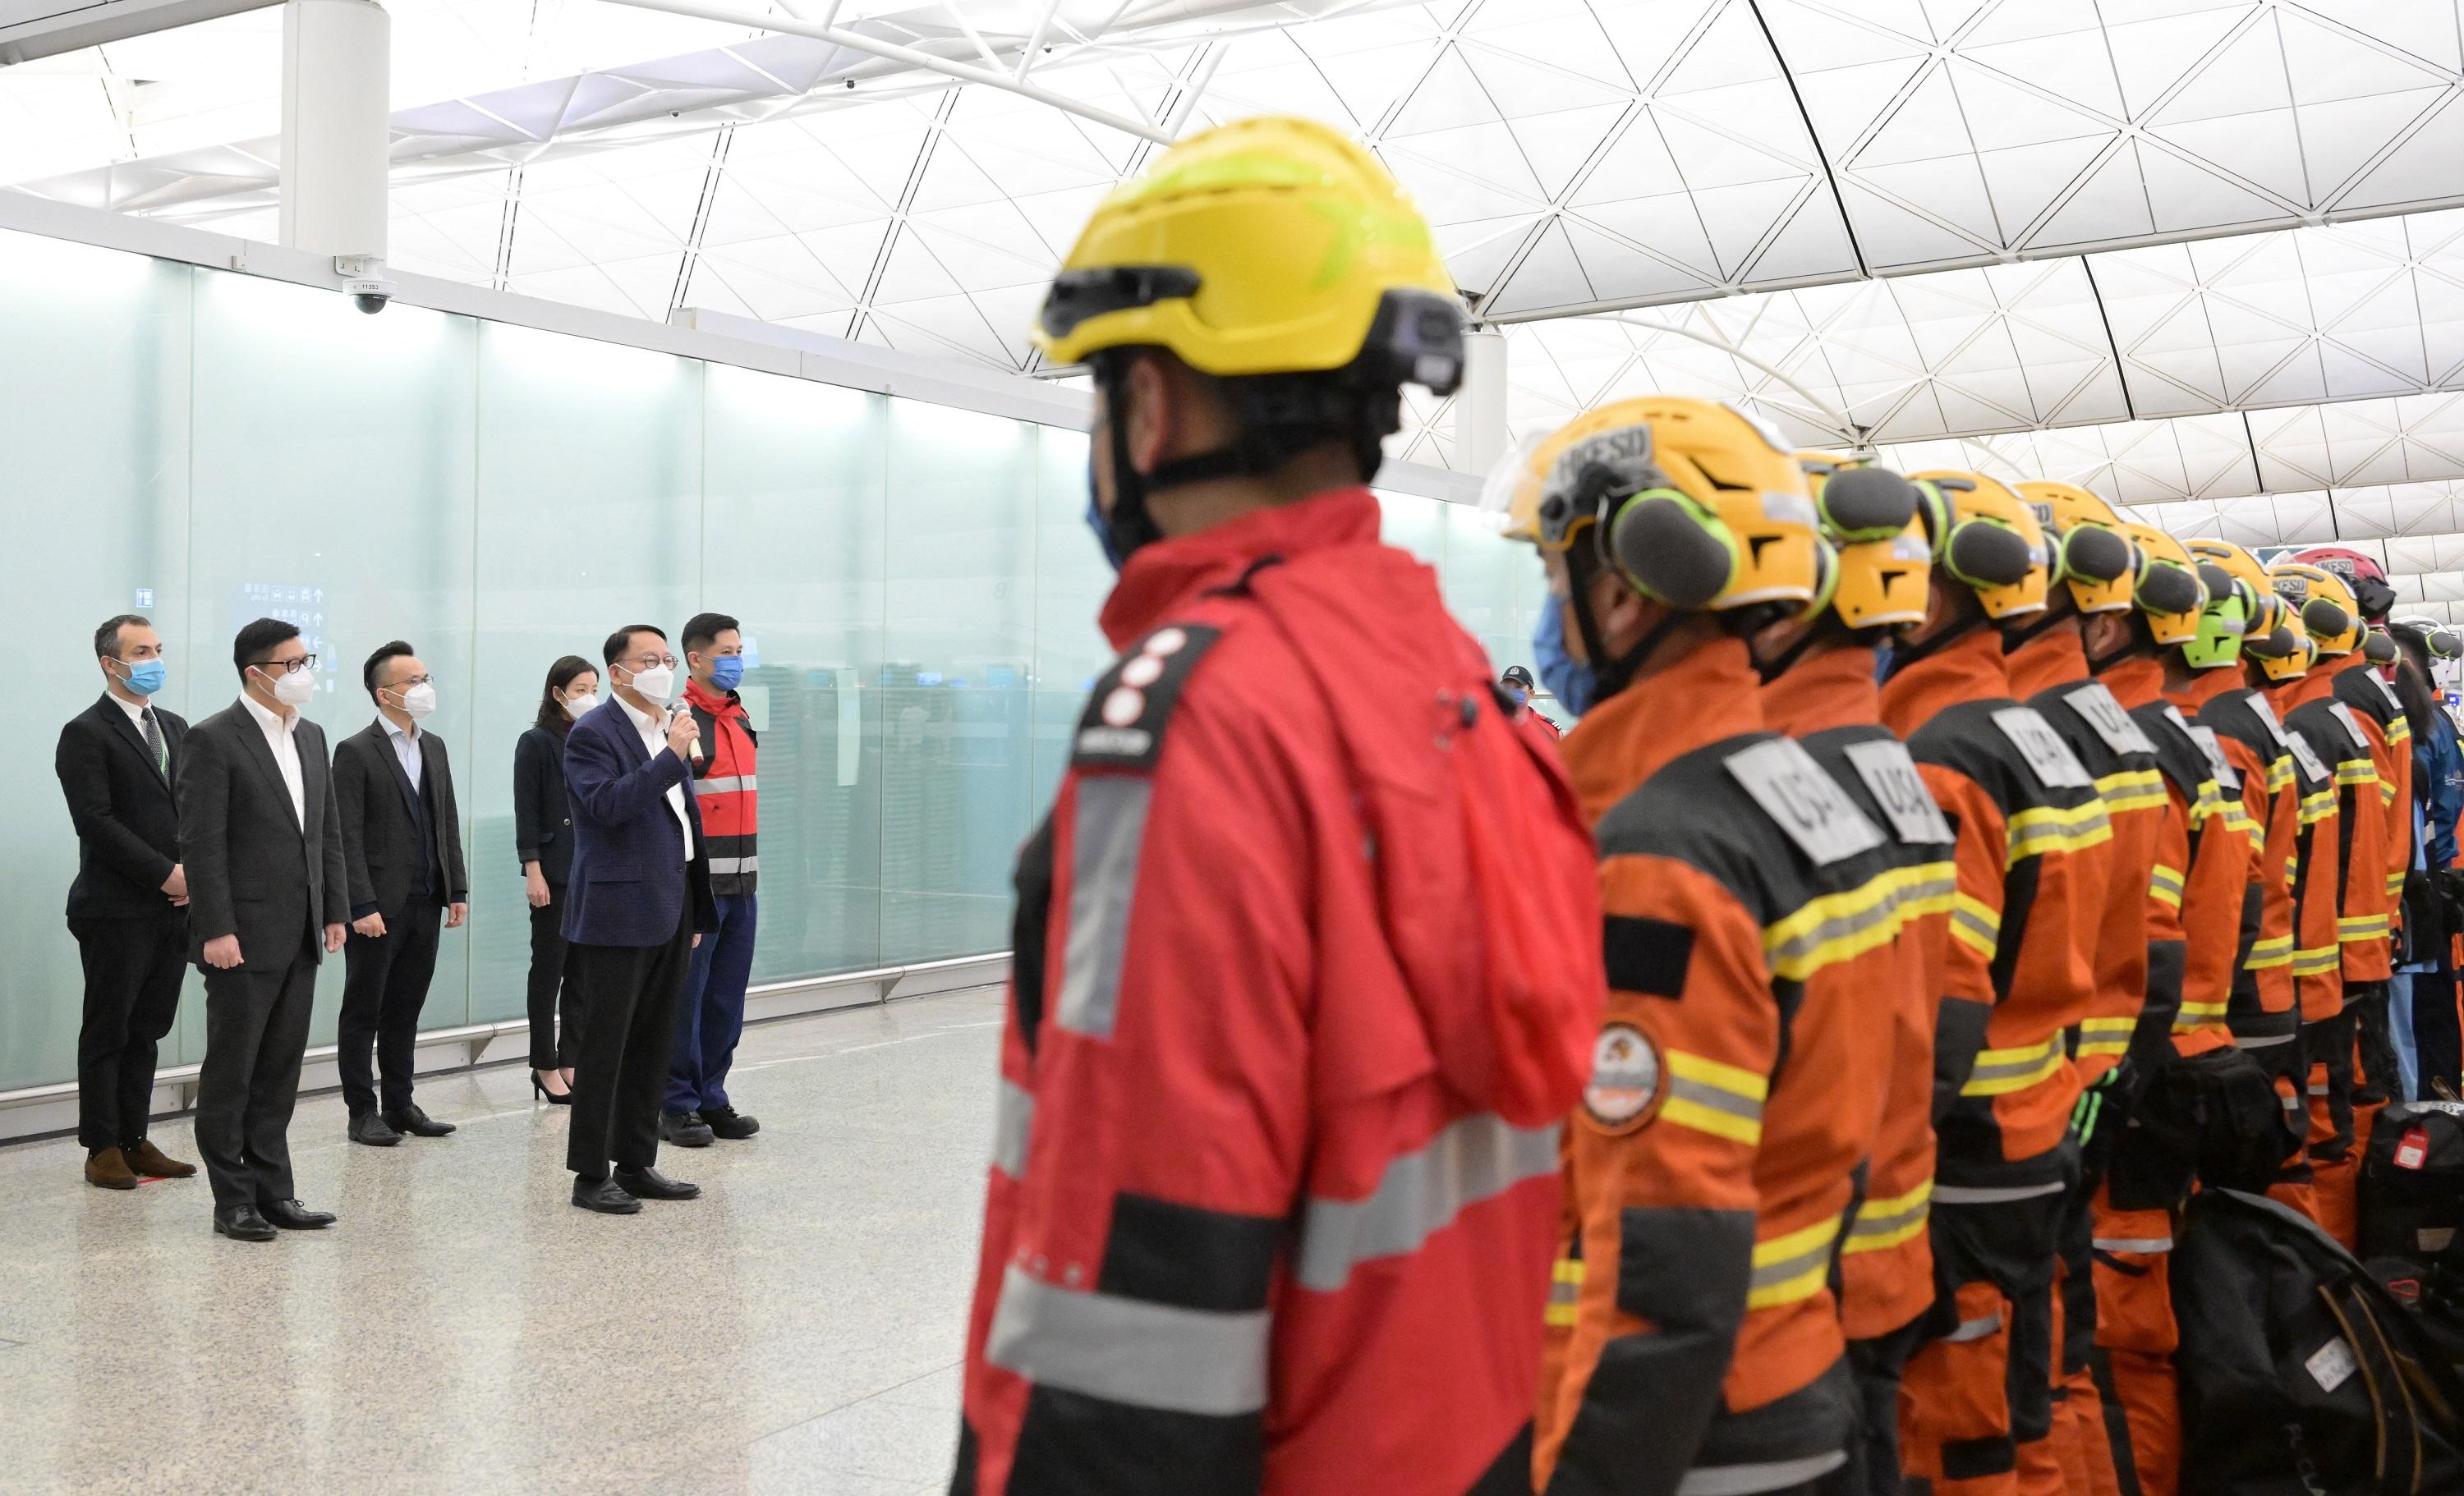 The Hong Kong Special Administrative Region (HKSAR) Government sent a 59-strong search and rescue team to the quake-stricken areas in Türkiye tonight (February 8) to assist in the search and rescue work. Photo shows the Acting Chief Executive, Mr Chan Kwok-ki (fifth left) showing support to the HKSAR search and rescue team.